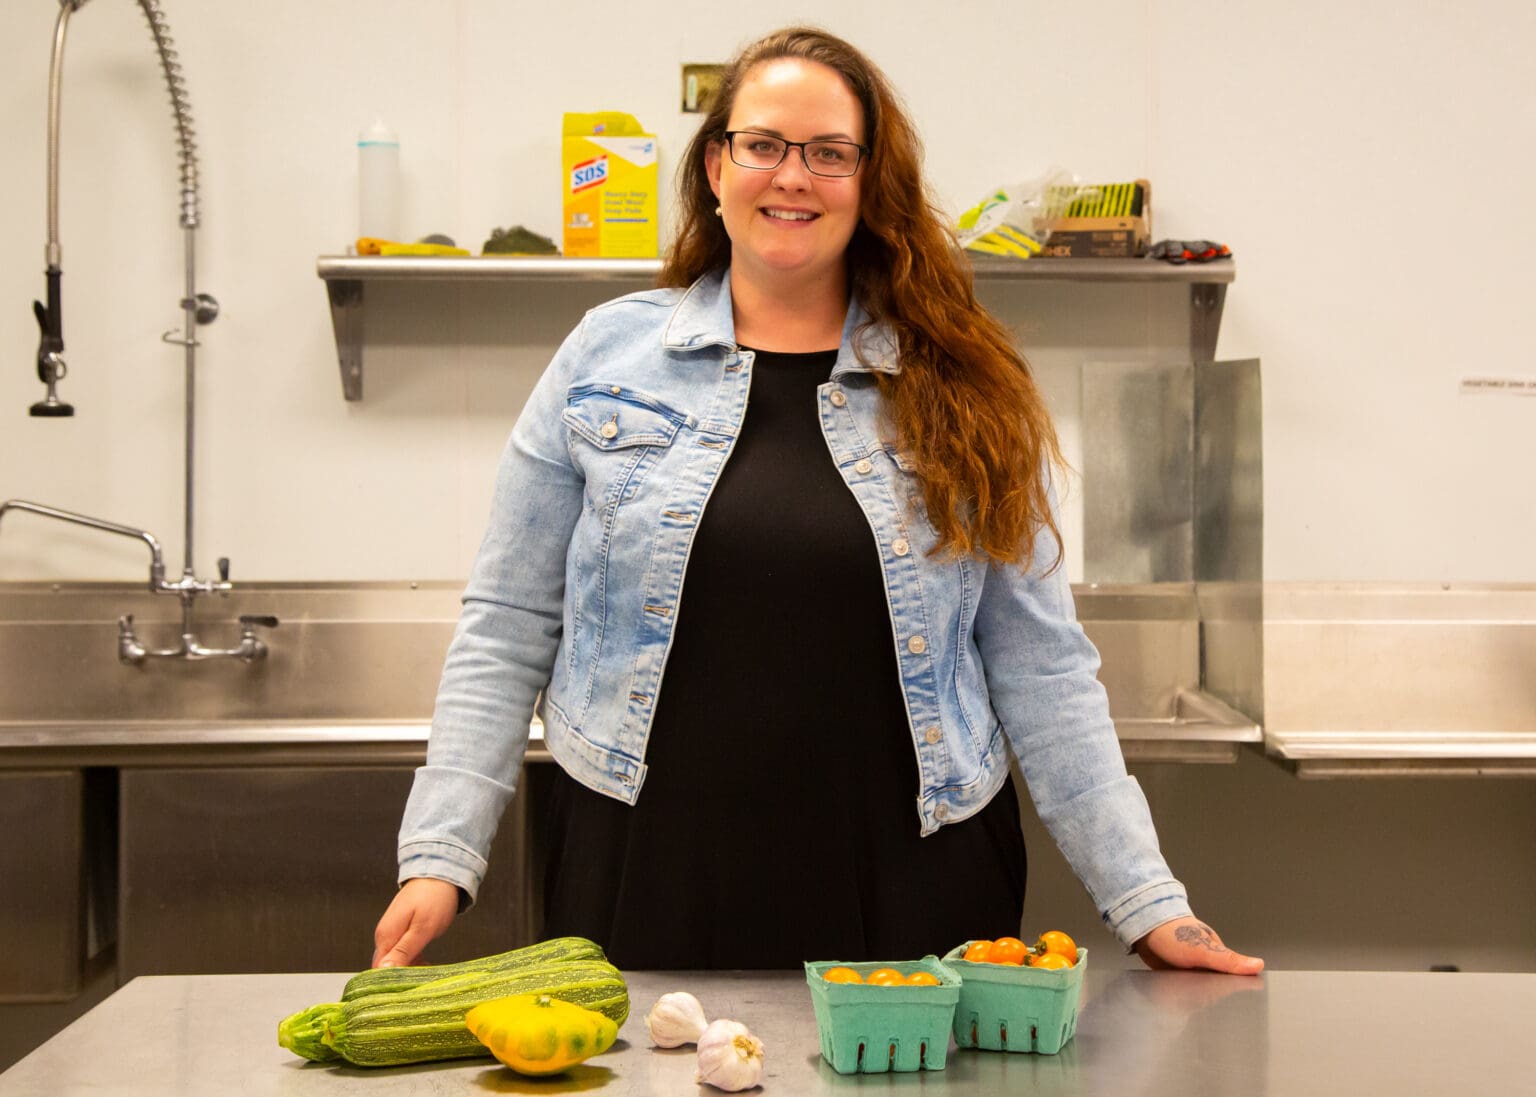 Courtney Bourasaw opened The Skagit Table in downtown Mount Vernon as a way to provide healthy